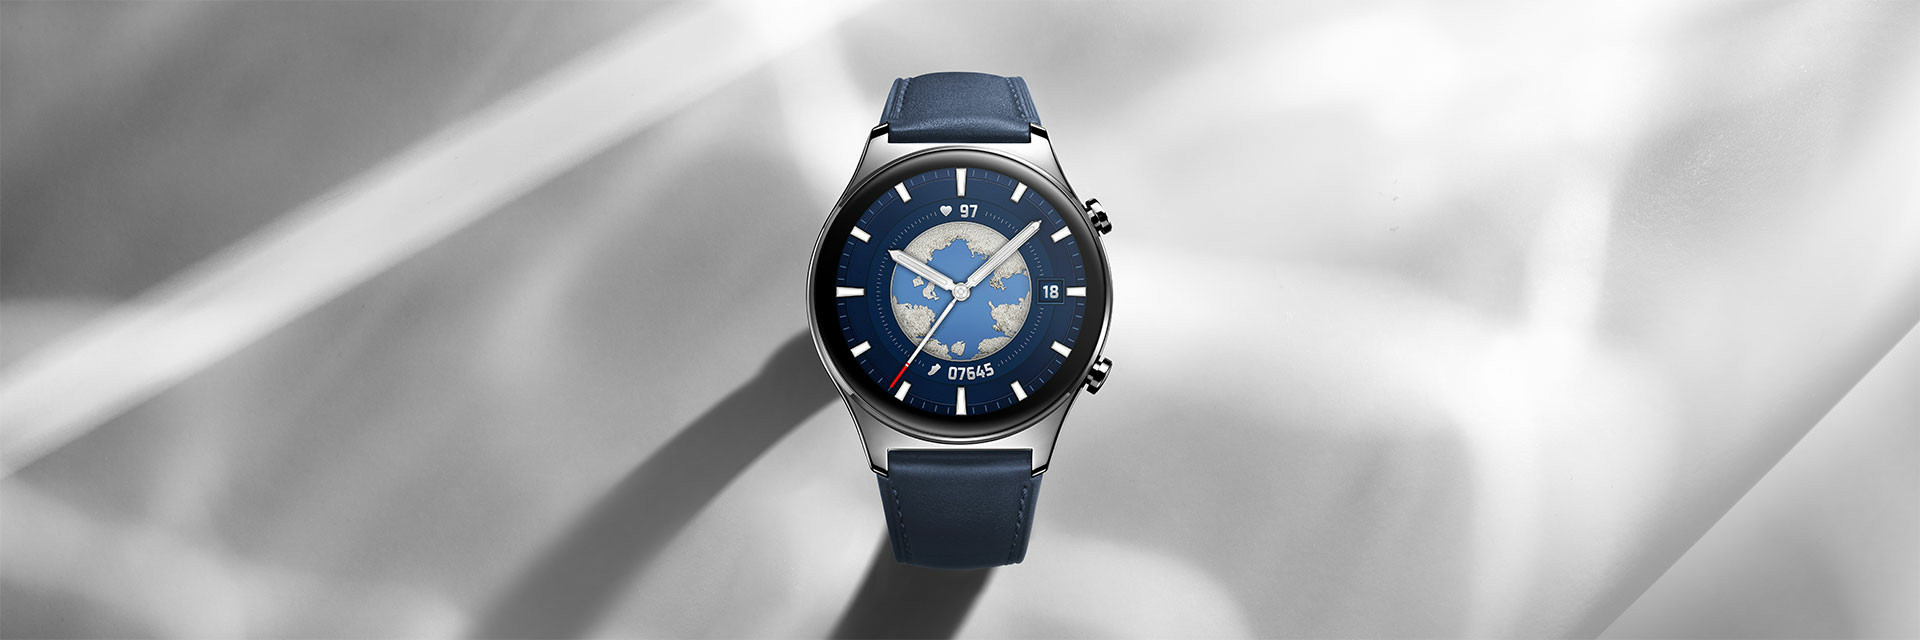 HONOR Watch GS 3.